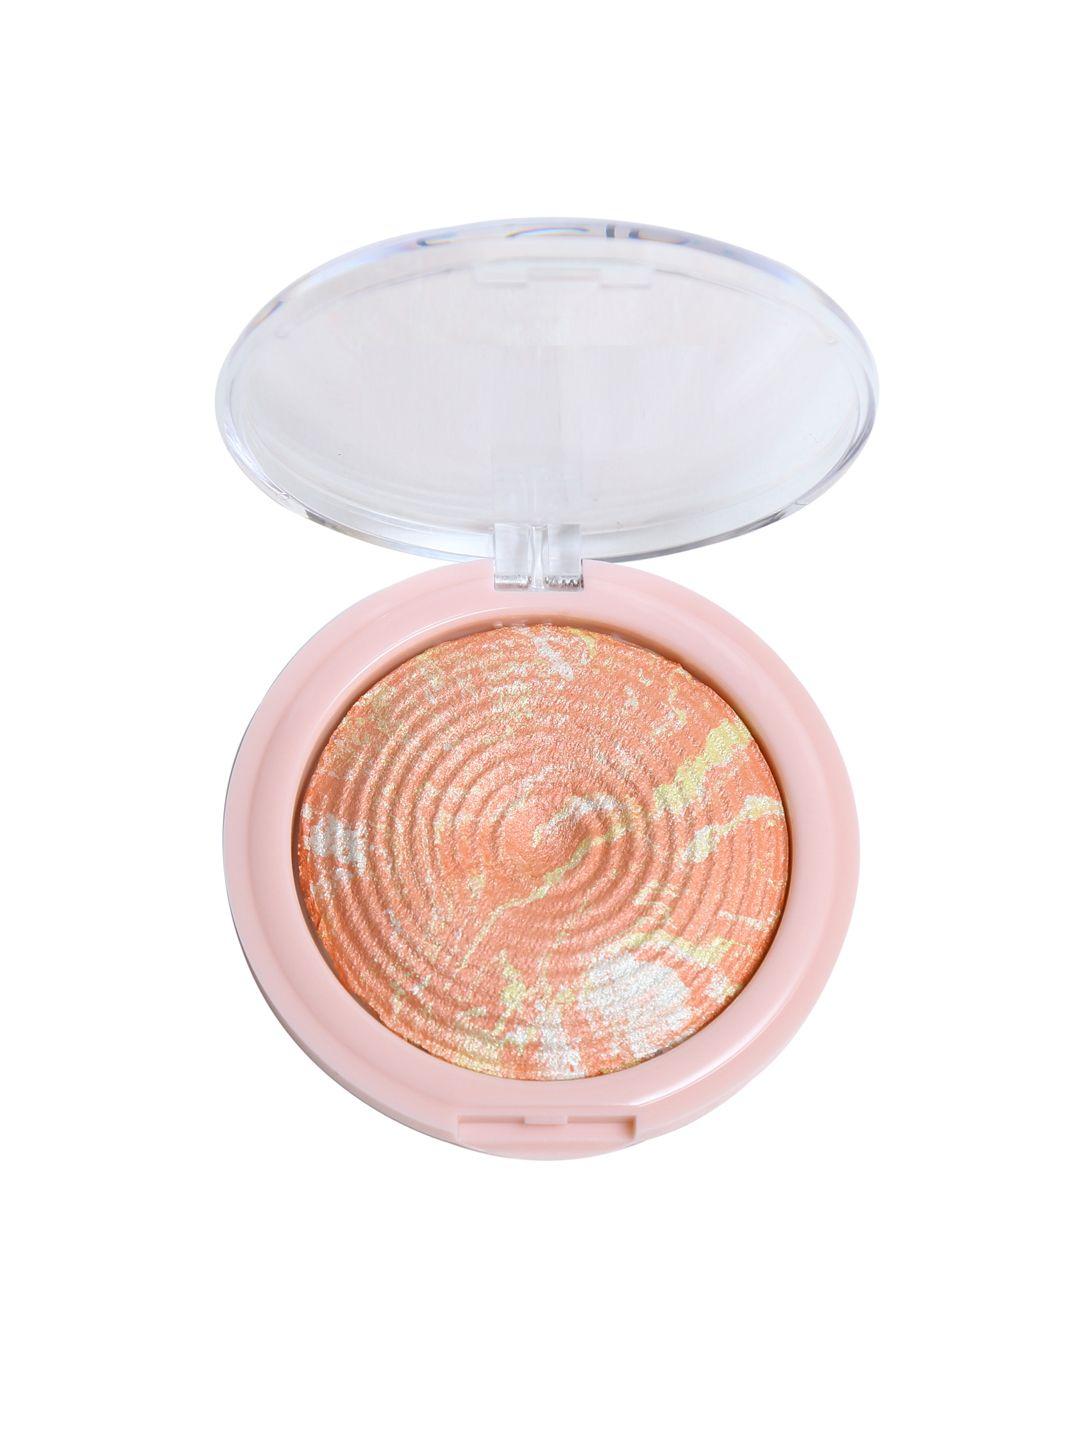 miss claire 02 baked blusher 8g